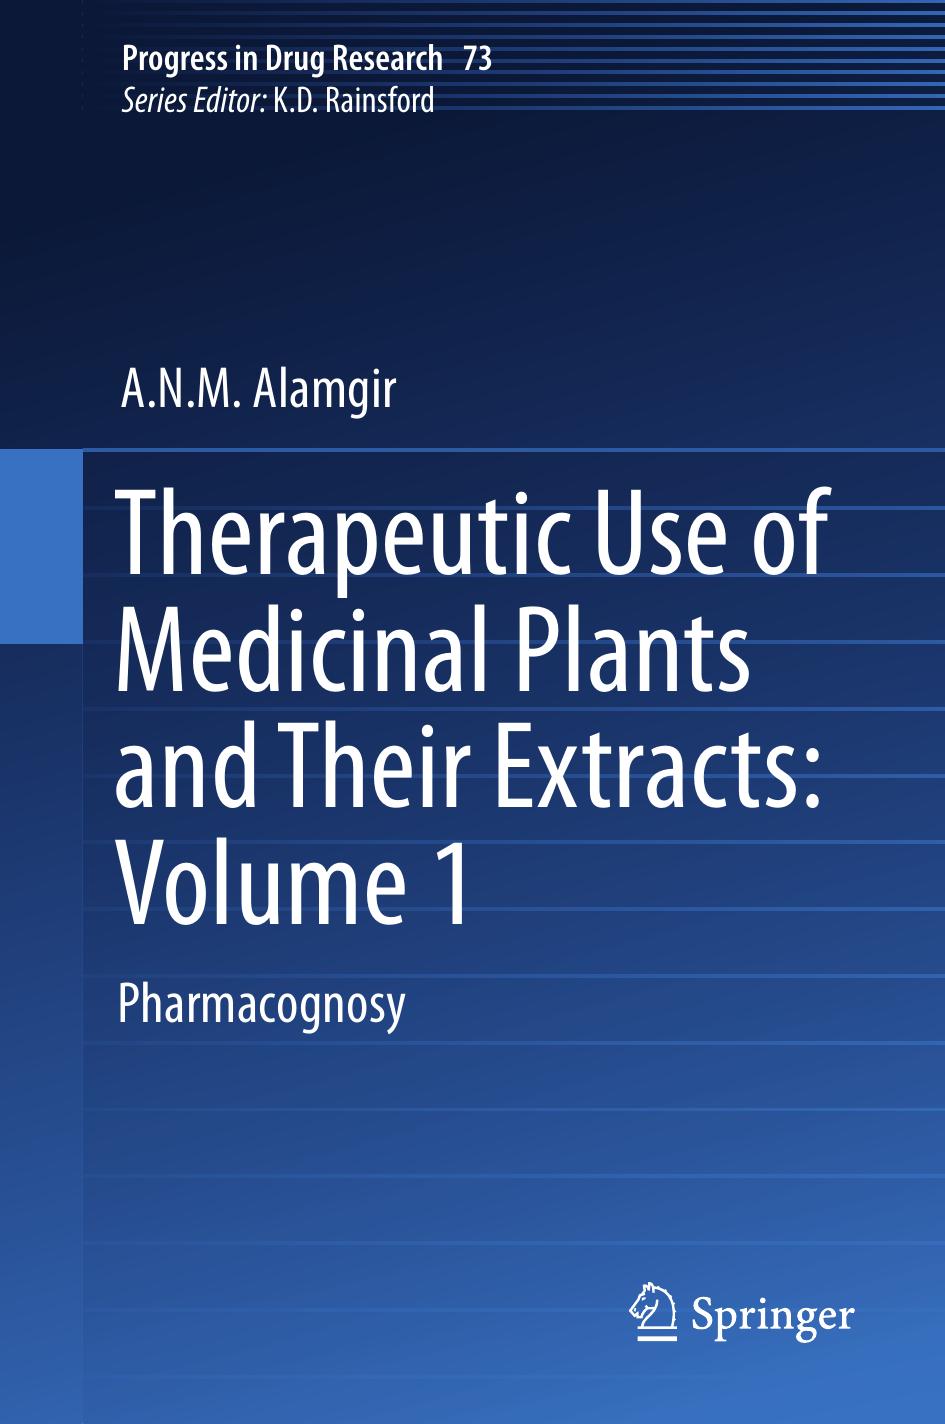 Therapeutic Use of Medicinal Plants and Their Extracts  Pharmacognosy 2017